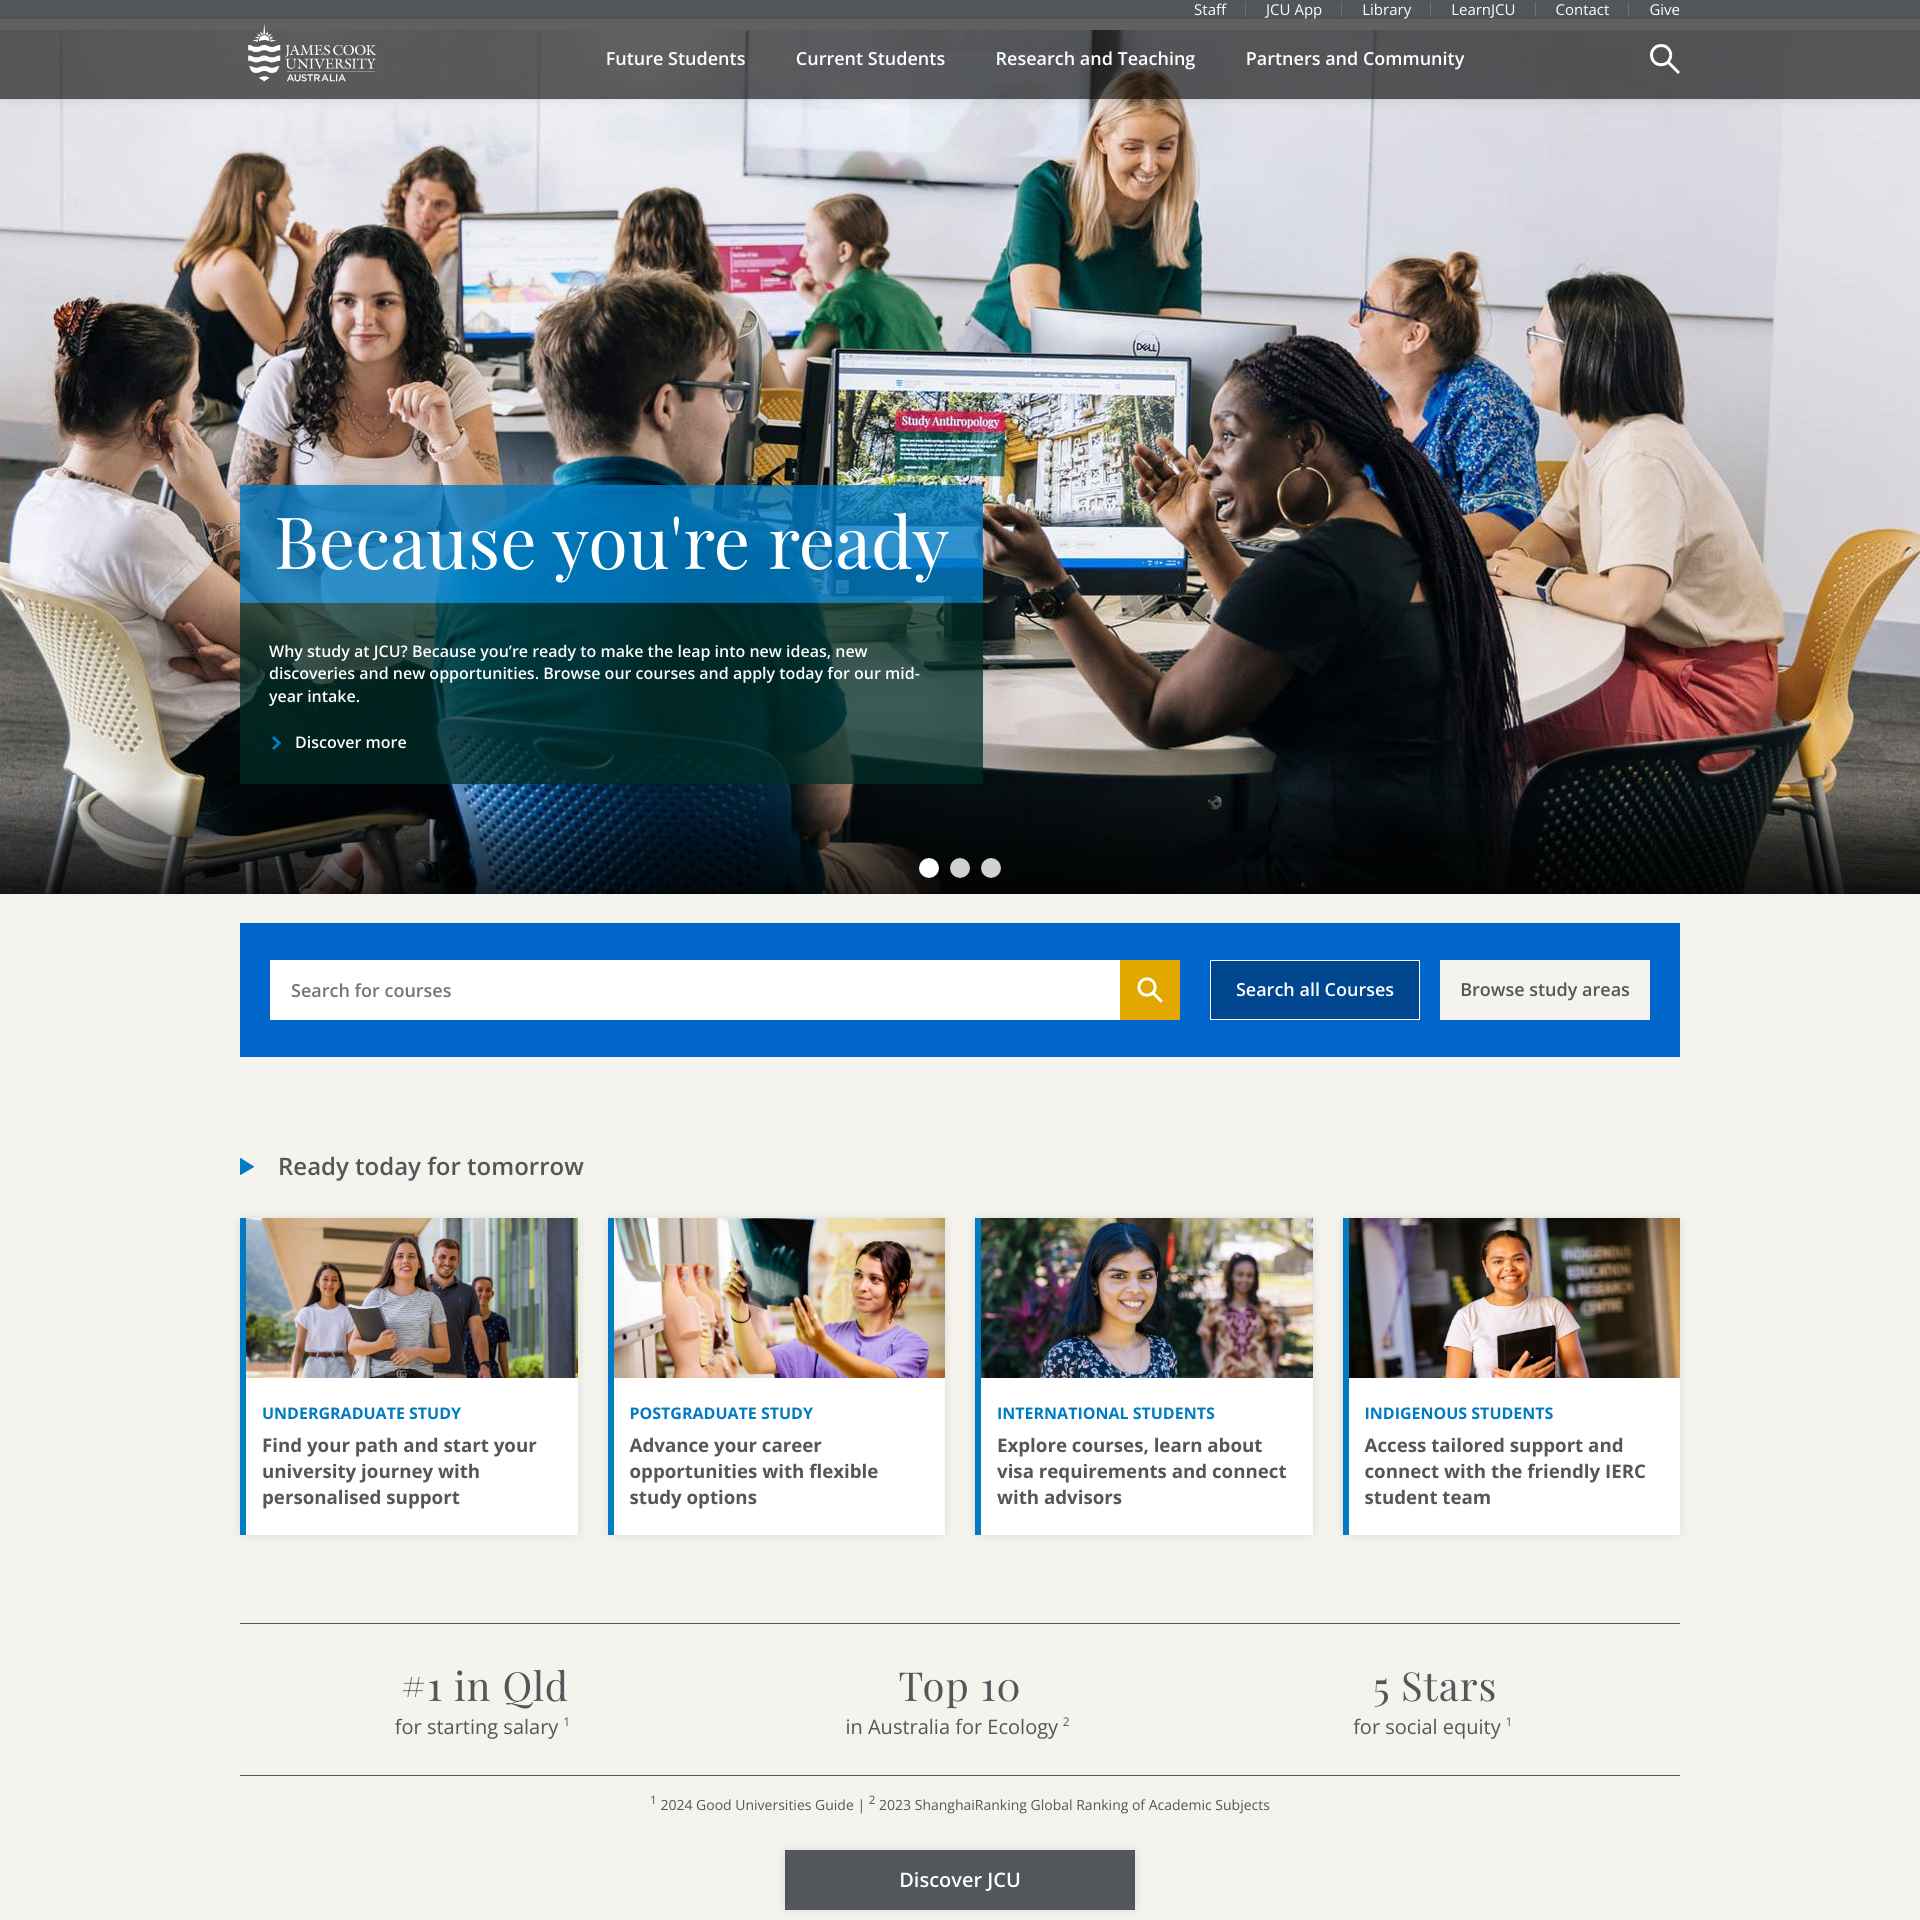 James Cook University’s Official Website: The Gateway to Academic Excellence